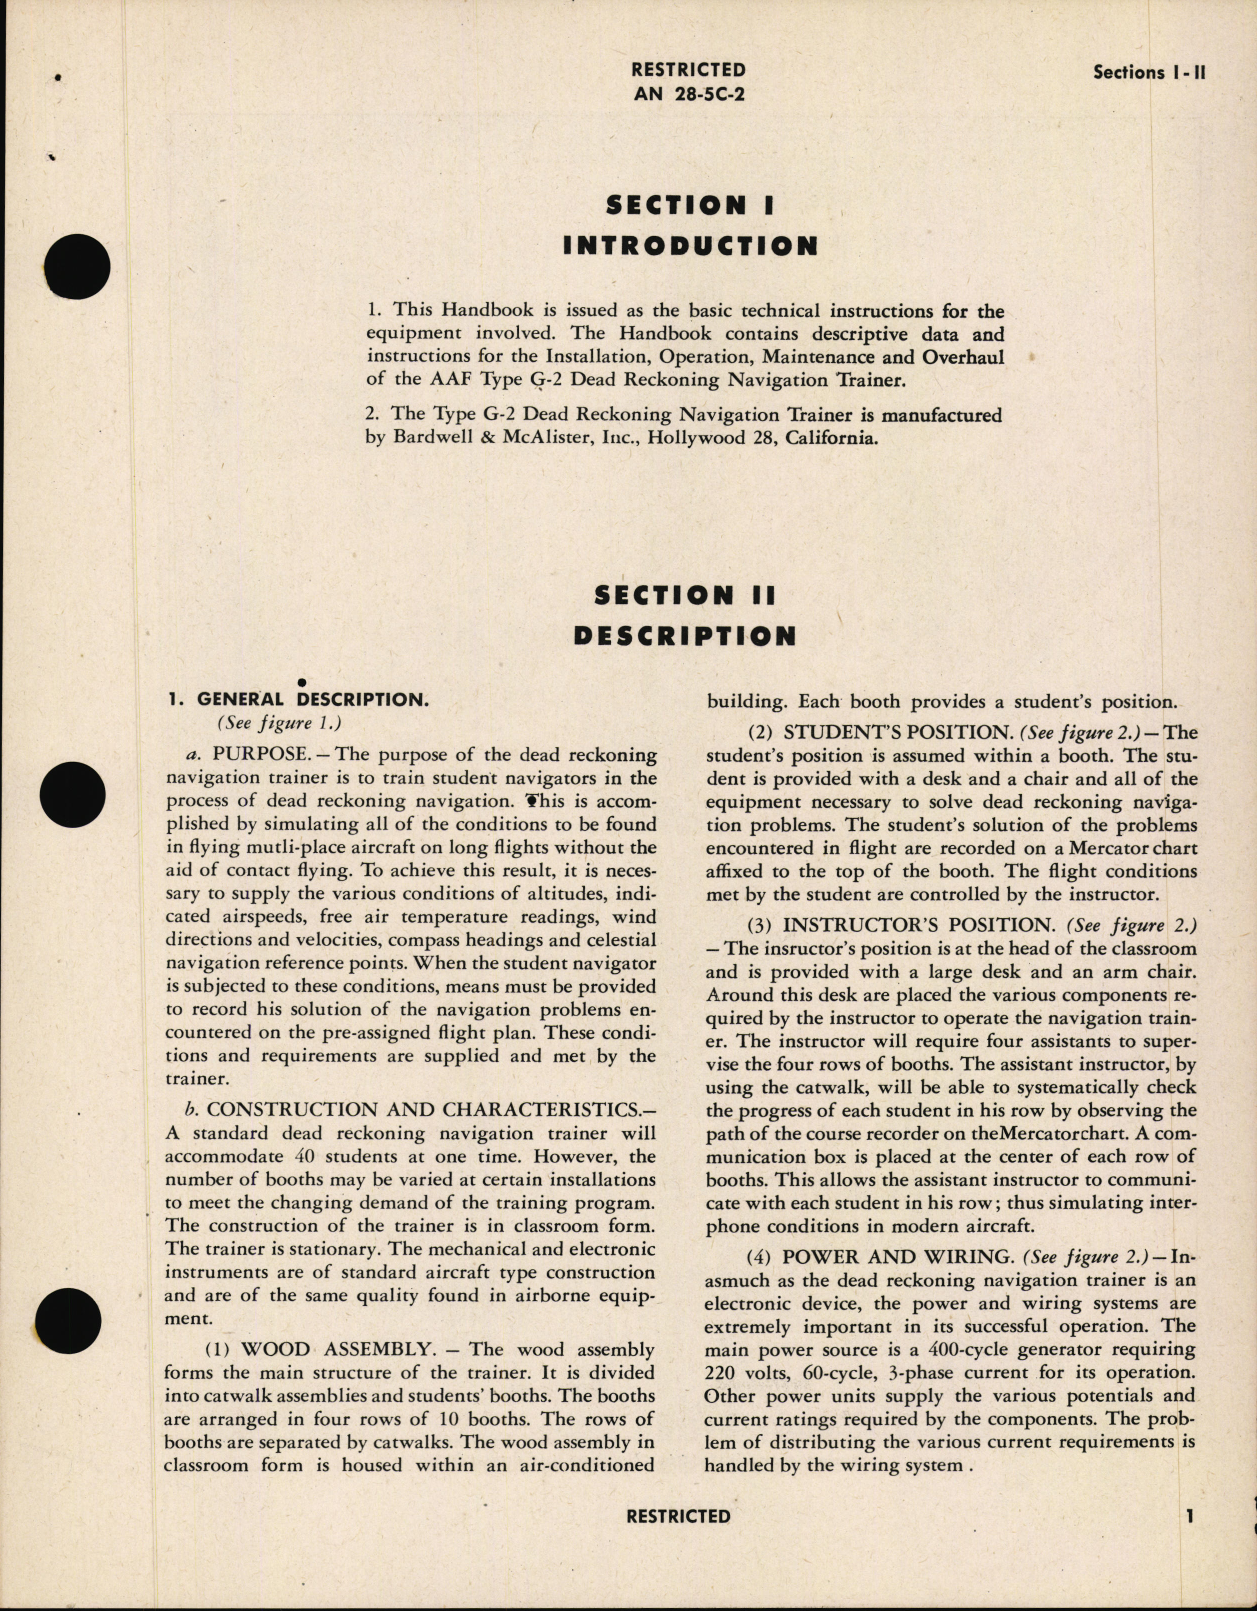 Sample page 5 from AirCorps Library document: Handbook of Instructions for Dead Reckoning Navigation Trainer Type G-2